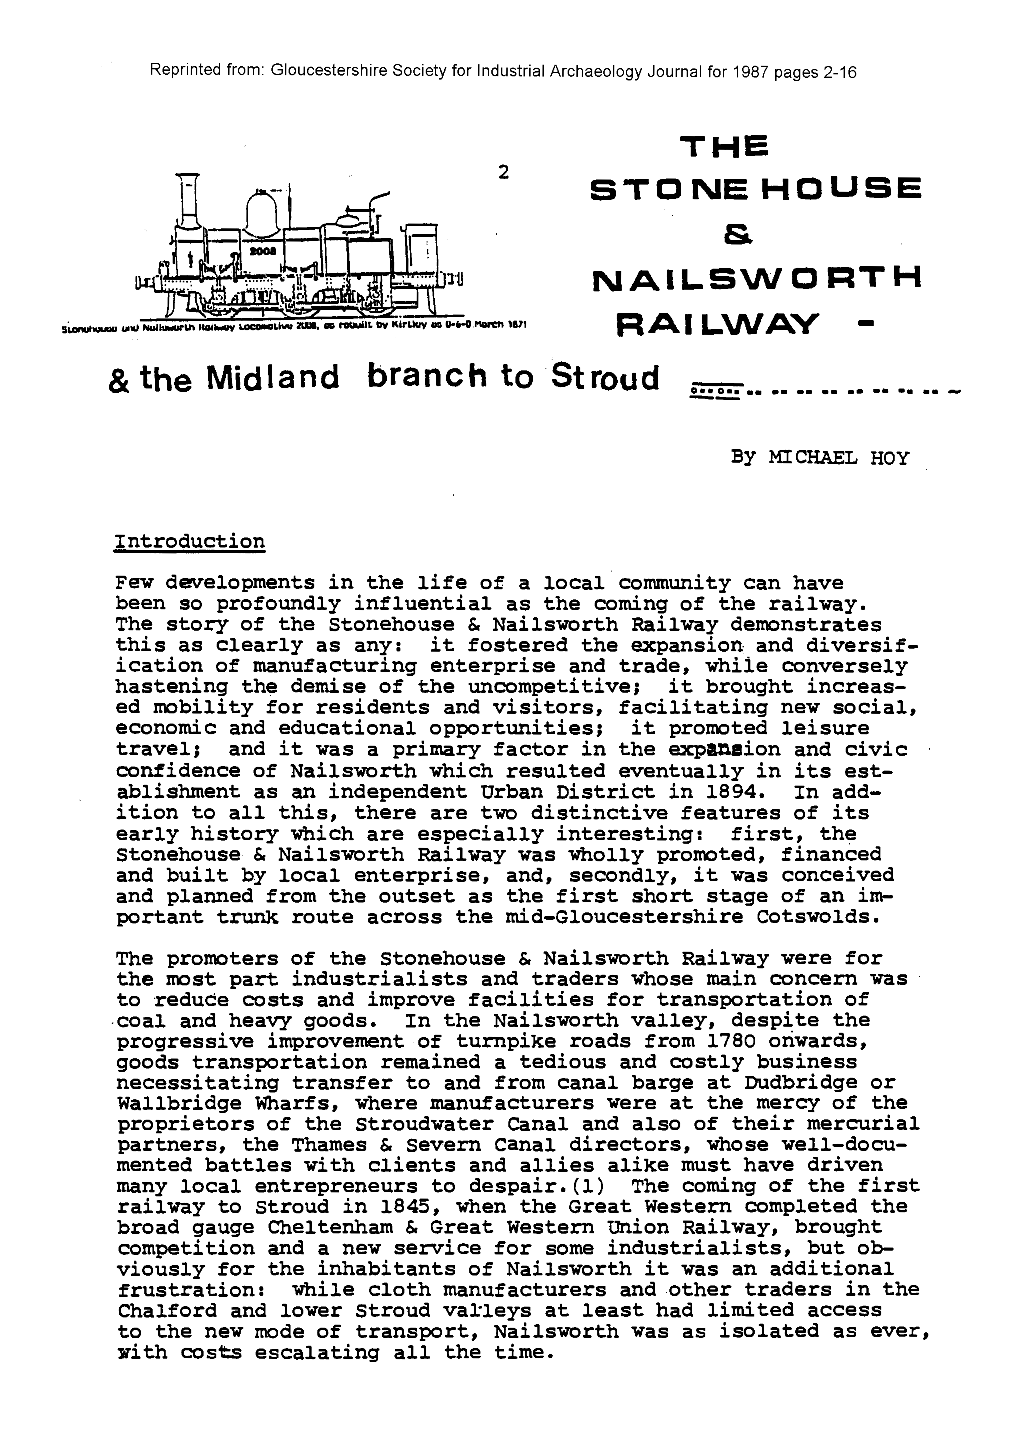 Reprinted From: Glouoestershire Society for Industrial Archaeology Journal for 1987 Pages 2-16